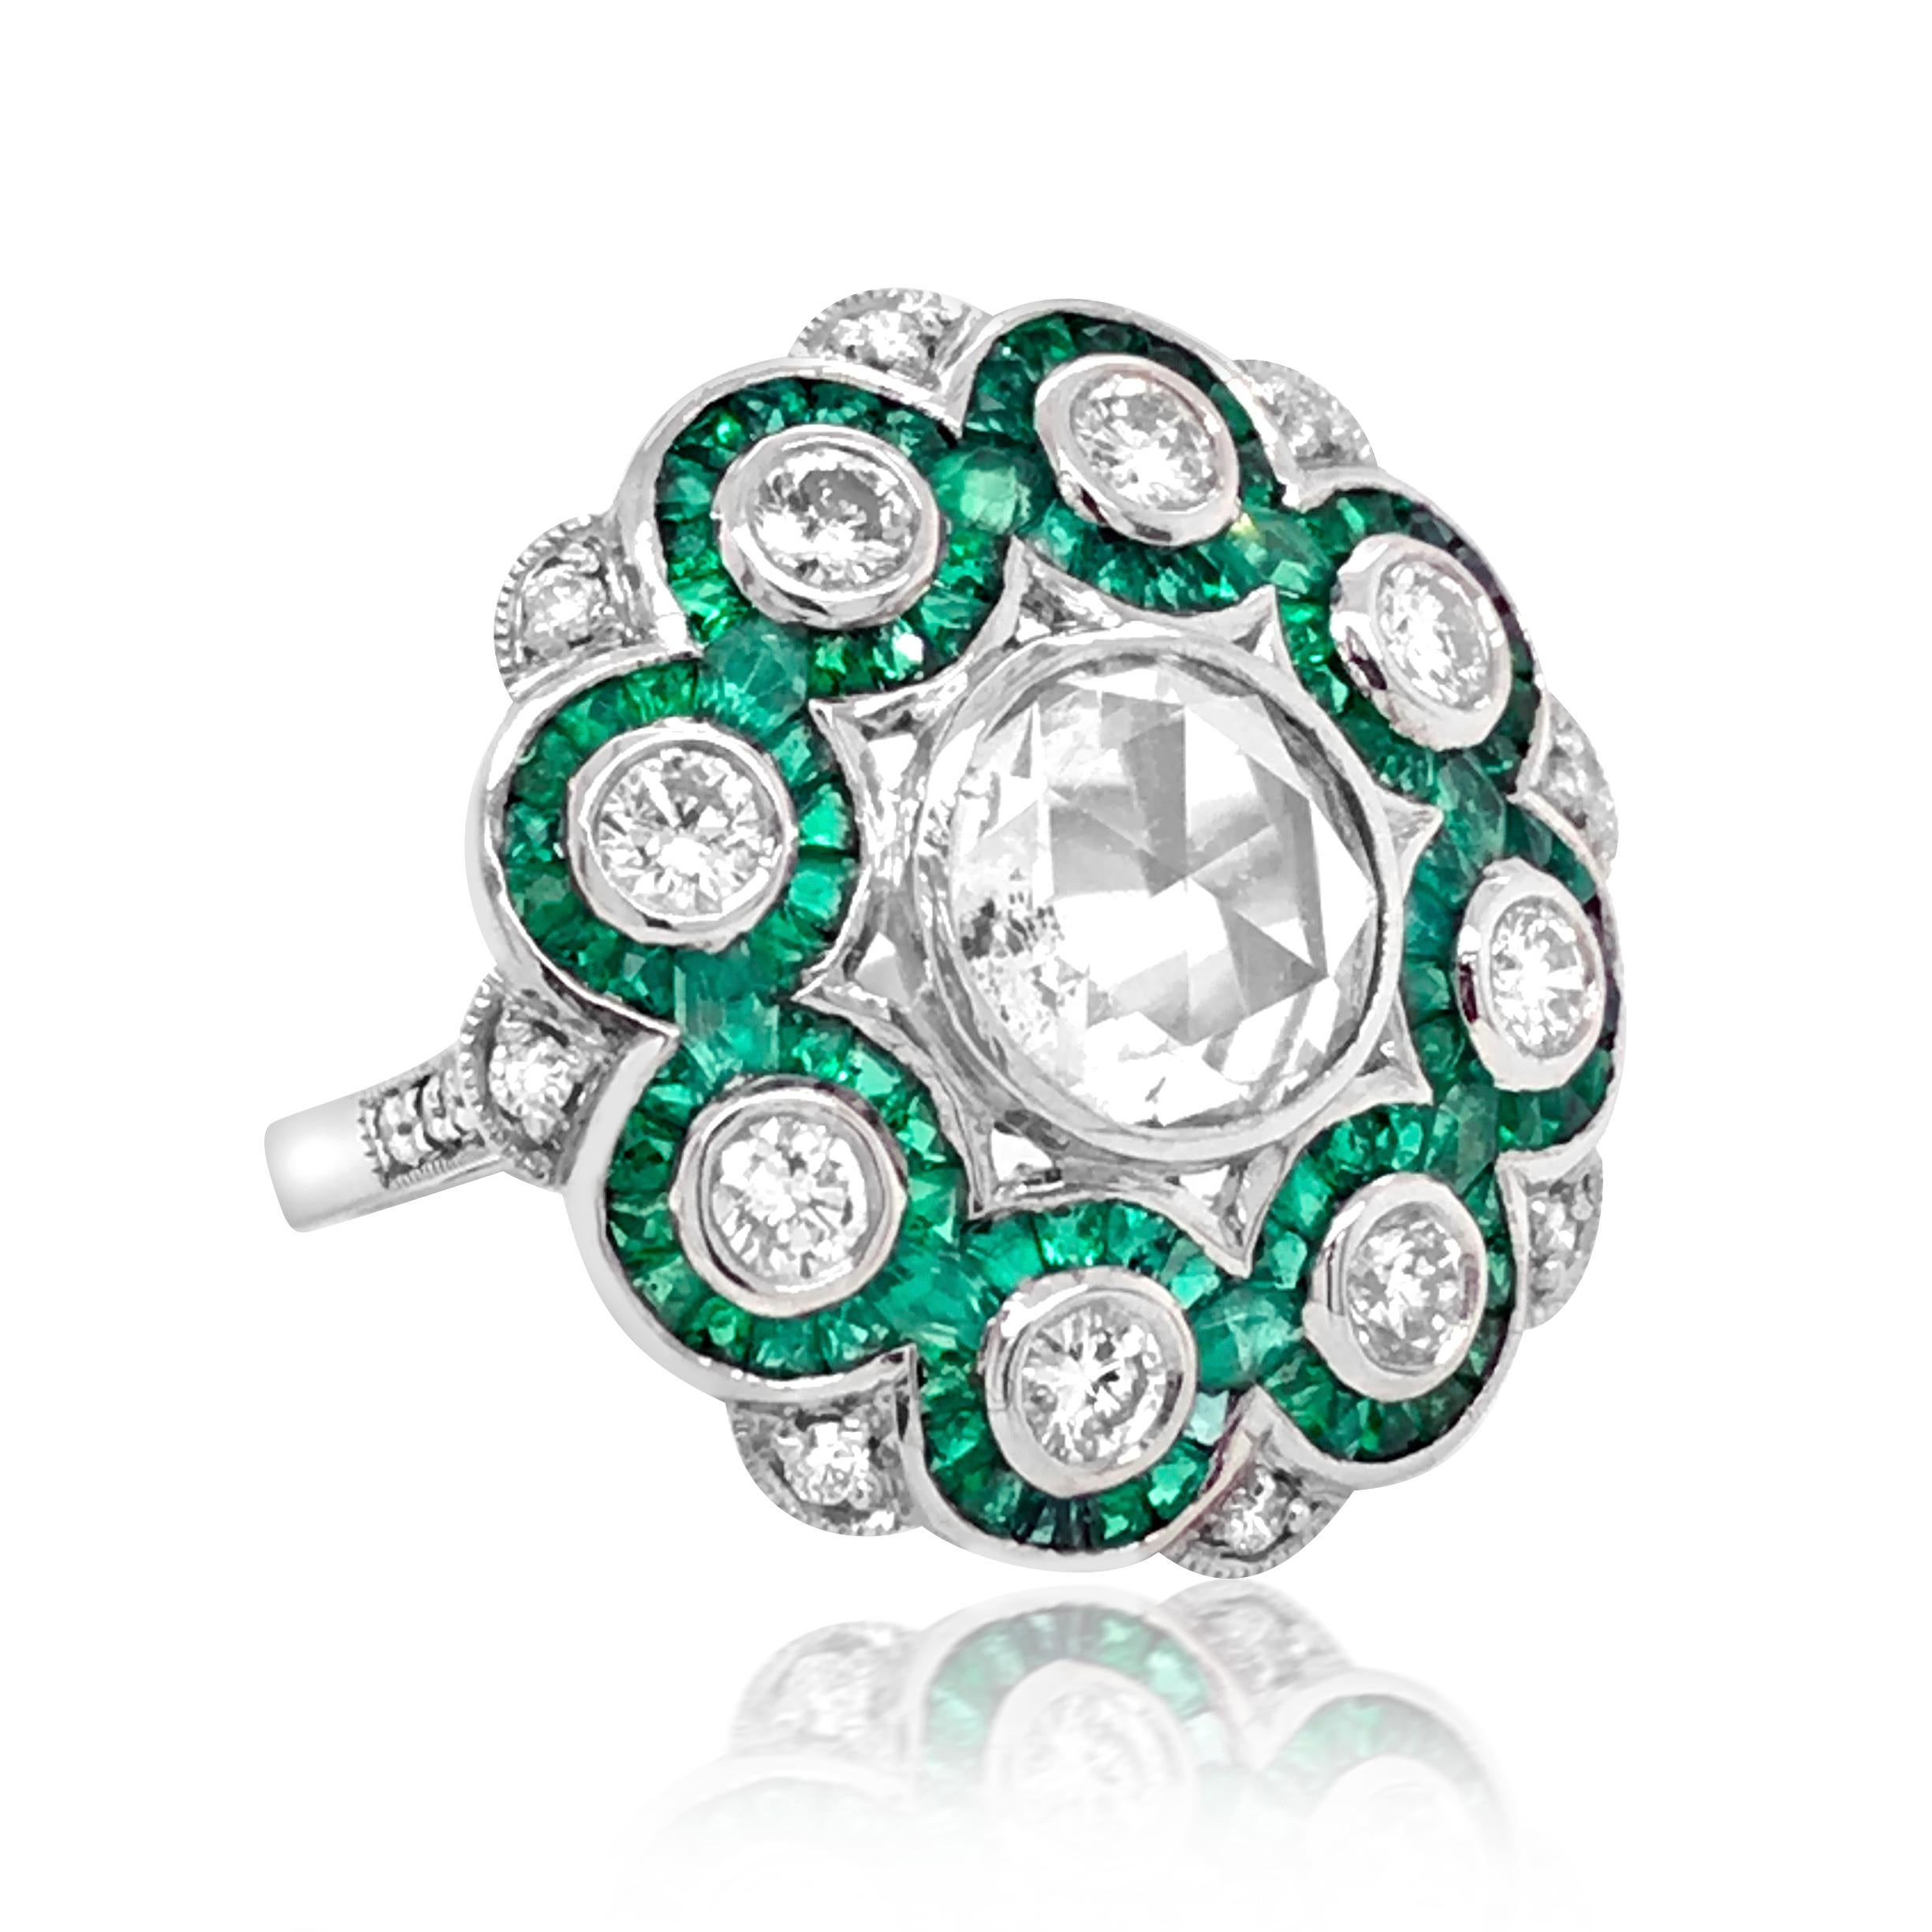 This stunning and captivating emerald and diamond ring is crafted in solid platinum, centered with a rose cut diamond graded G-H/I1, enhanced with other 20 round diamonds, majority graded G-H/SI, few VS. The total diamonds weigh approx. 1.75ct. The